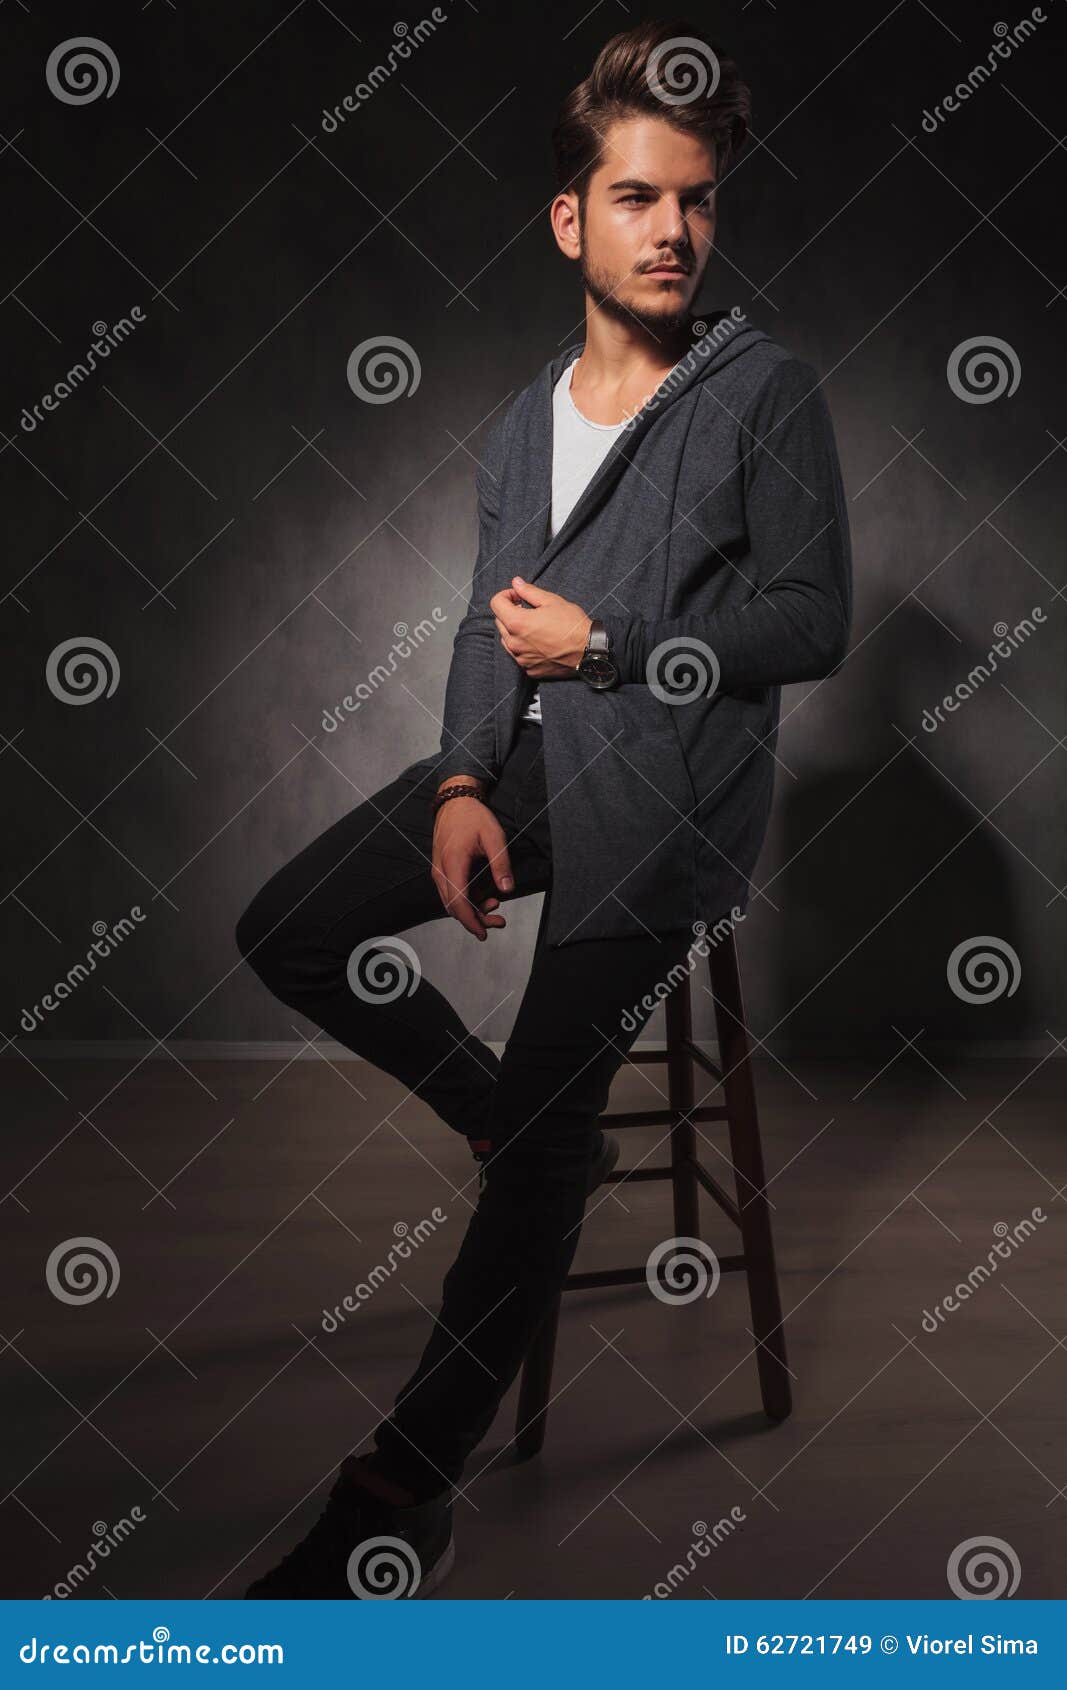 Male Model Posing in Studio while Arranging His Jacket Stock Image ...